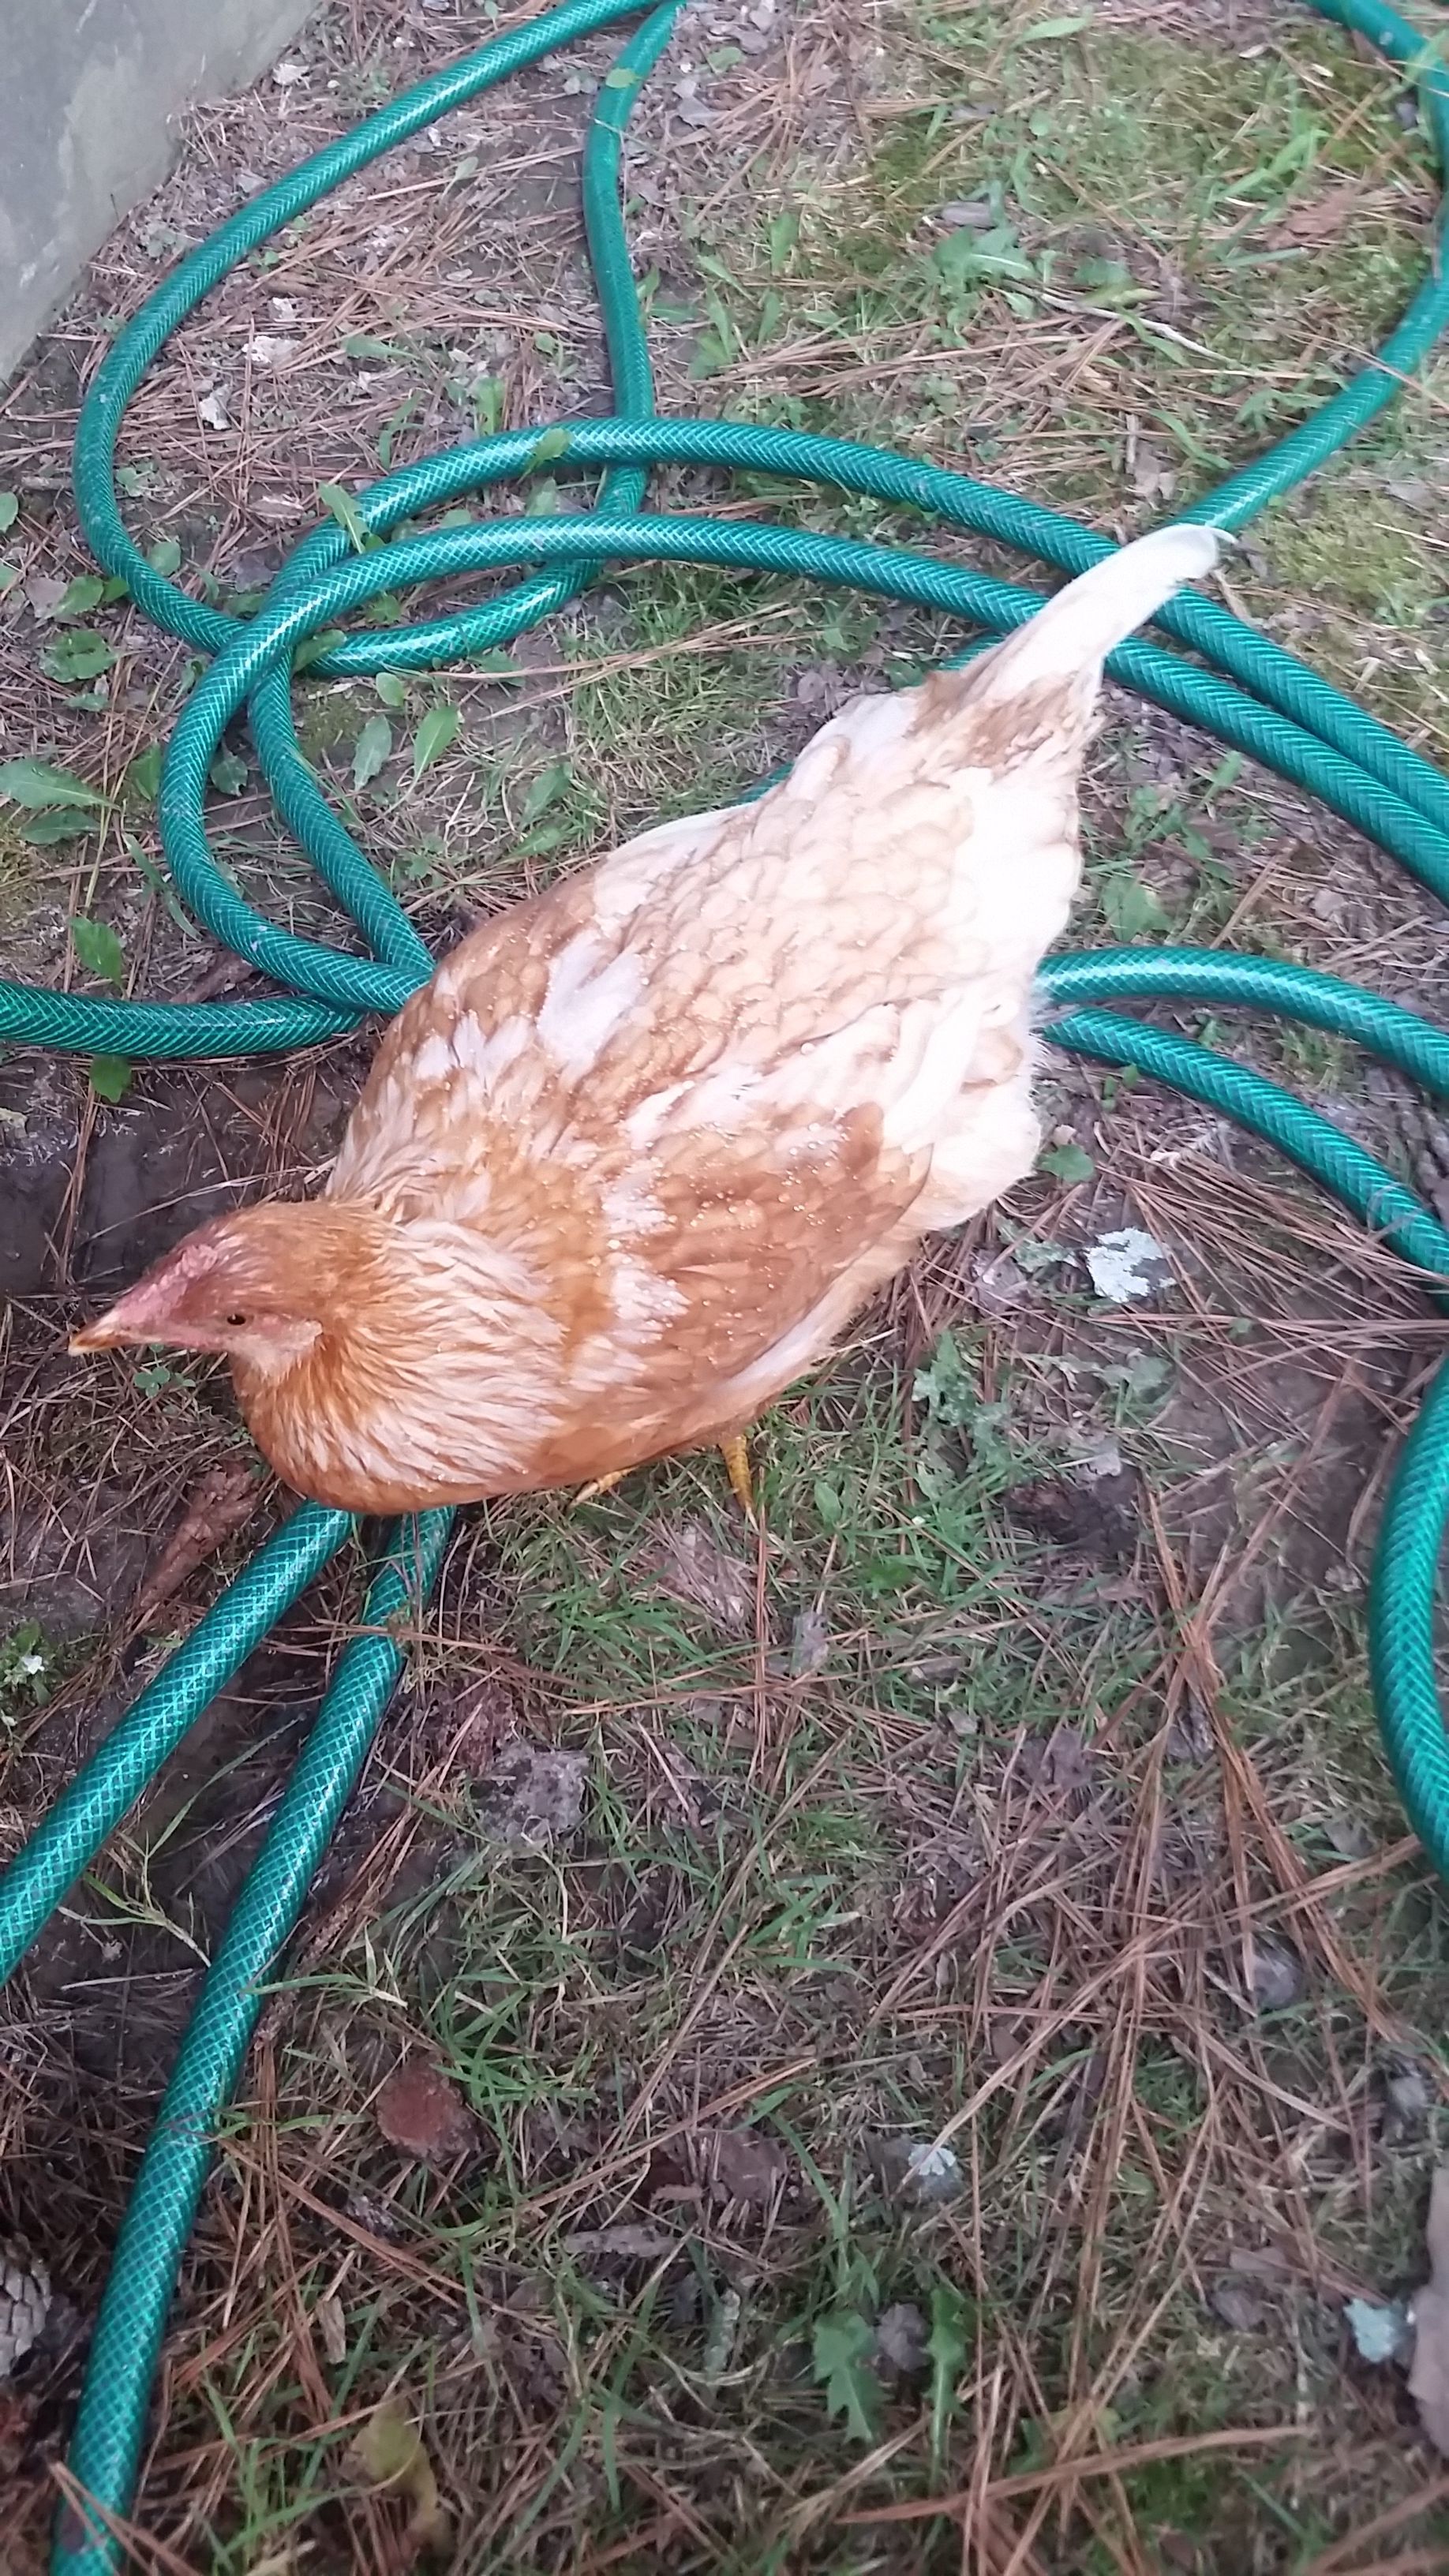 This is Abby before she got sick:( She loved catching the droplets off the leaky hose. She is the sweetest chicken ever. She loves to be held and always hangs out right next to you. Right now she's a little chicken warrior!